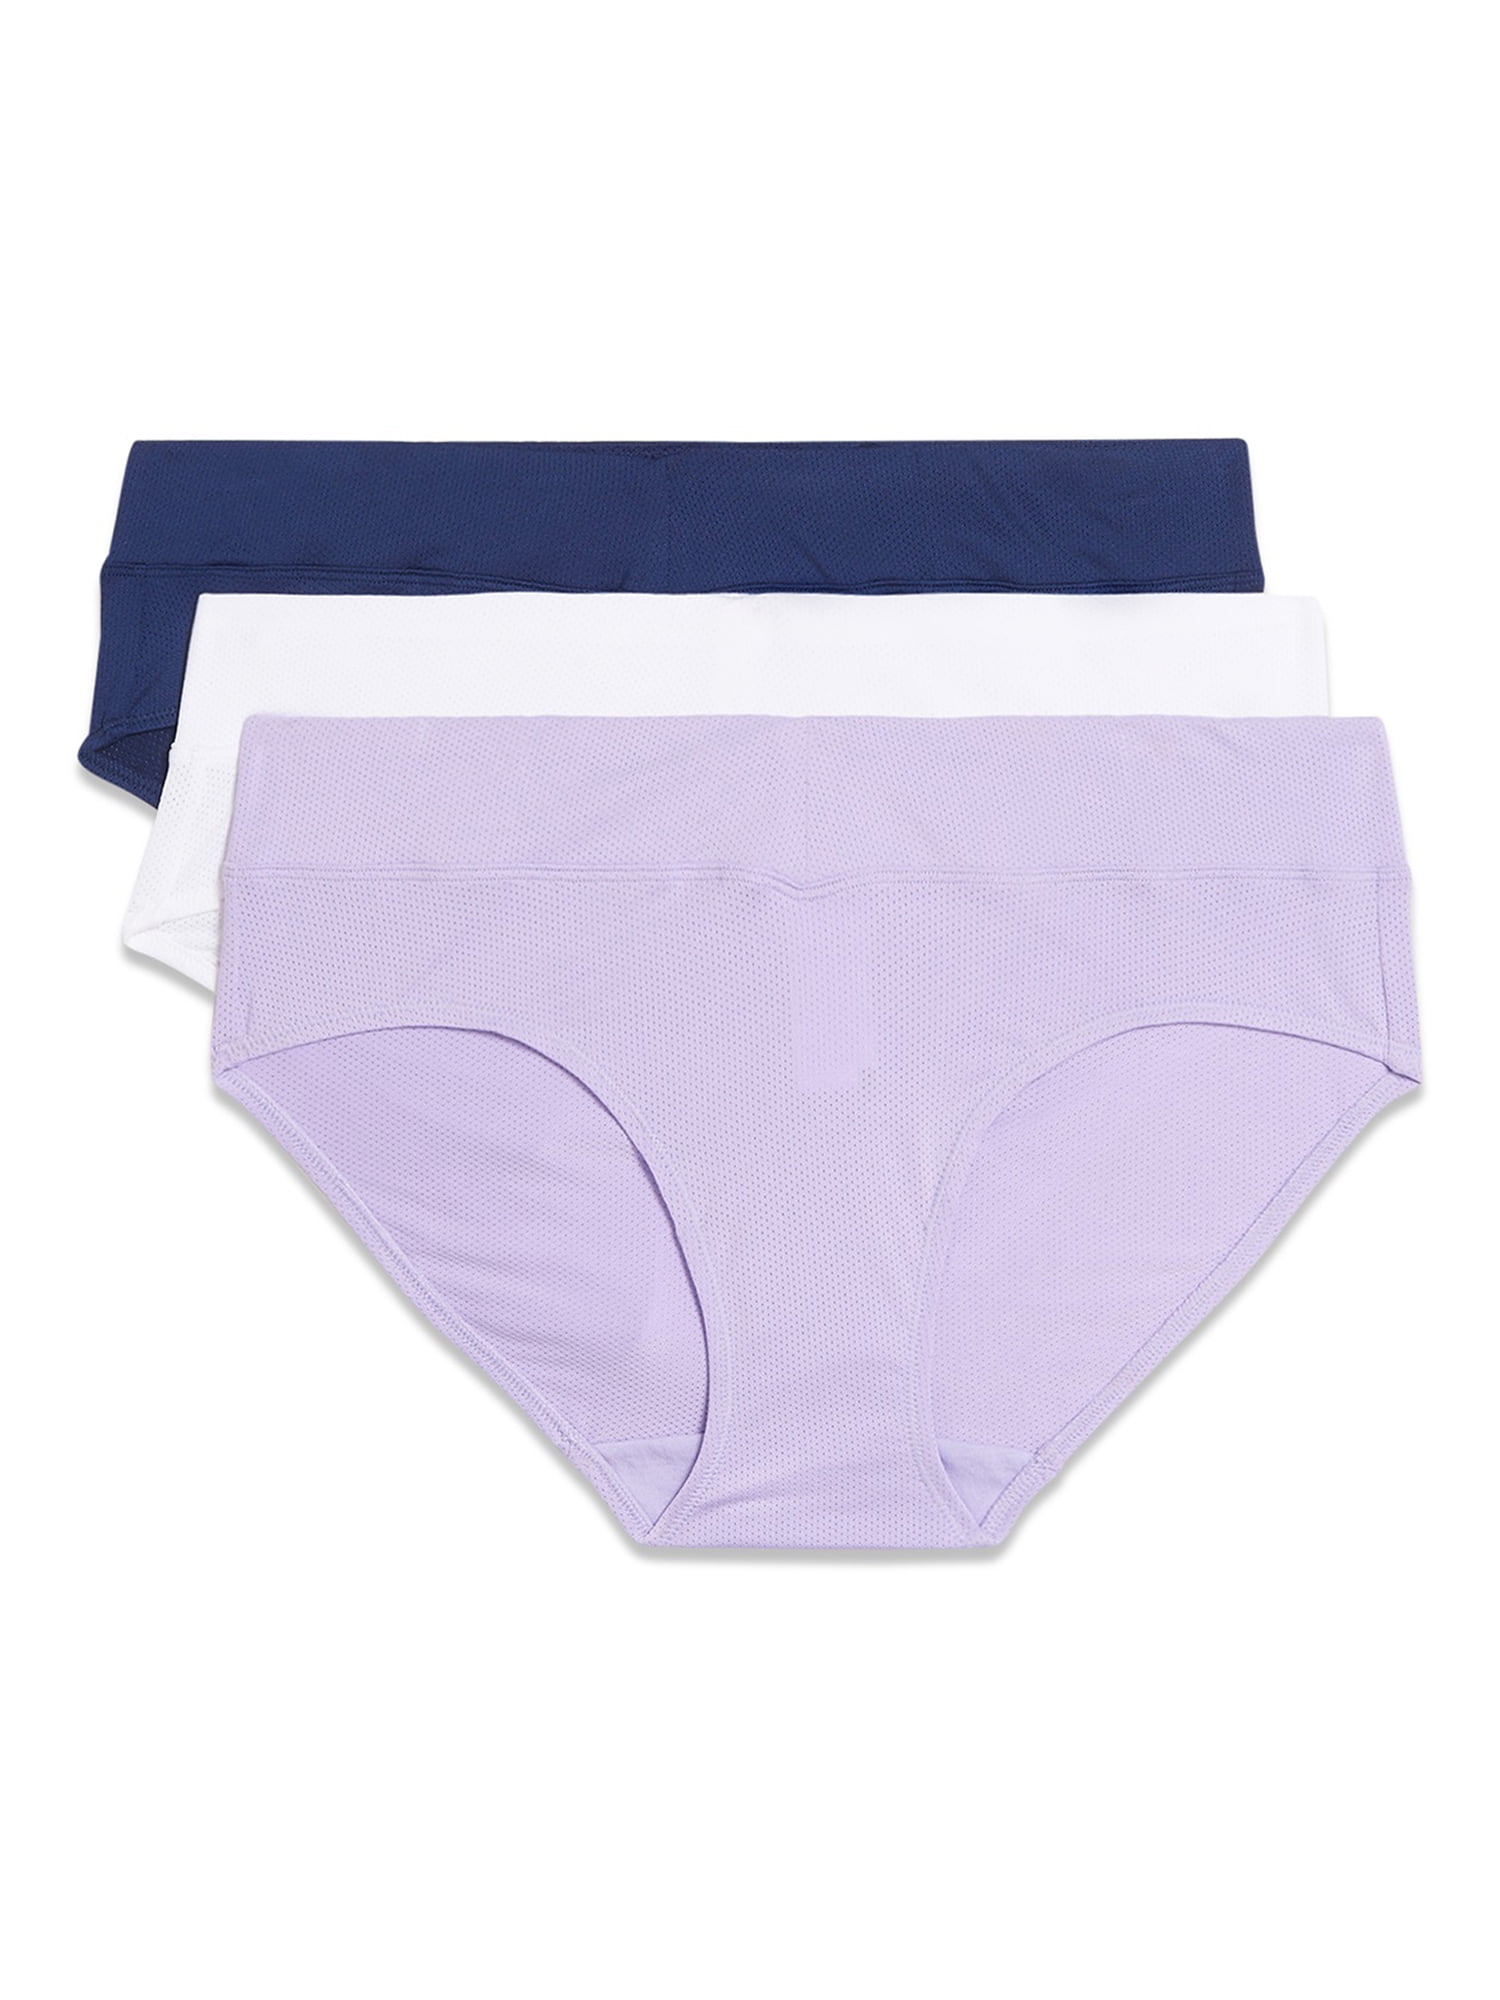 Blissful Benefits by Warner Brief Panties and 33 similar items